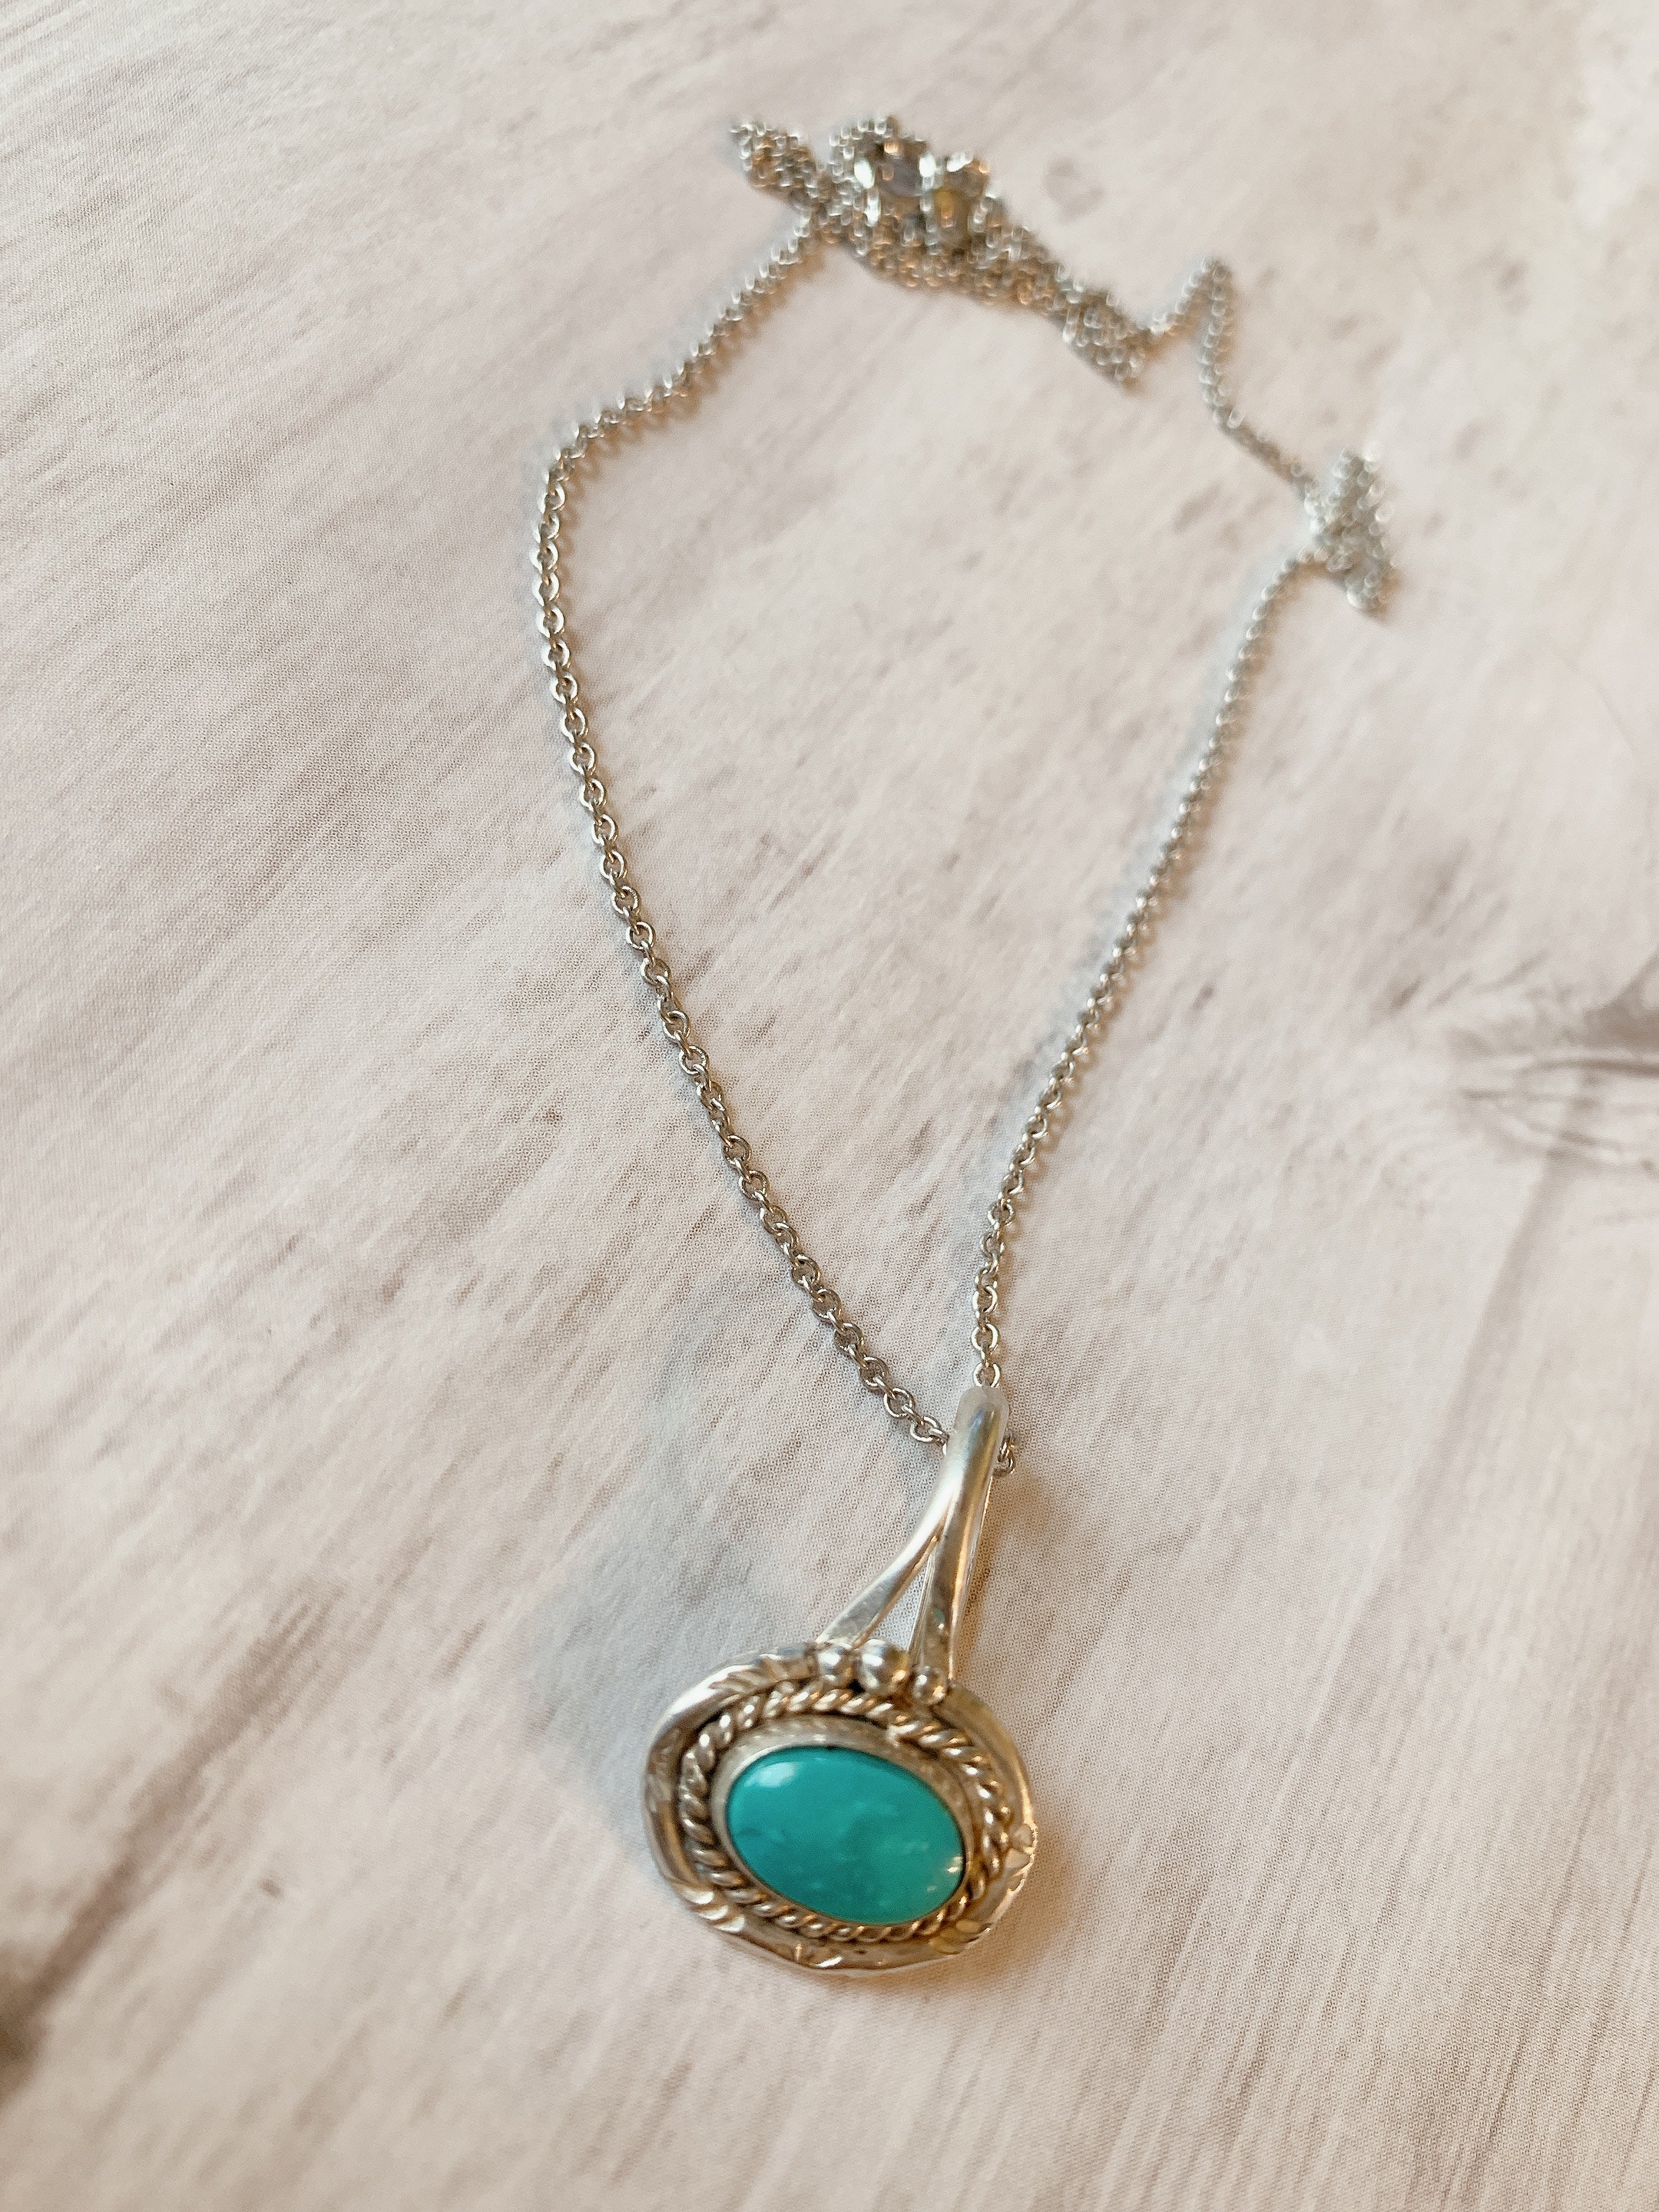 Turquoise Pendant Sterling Silver Vintage Necklace